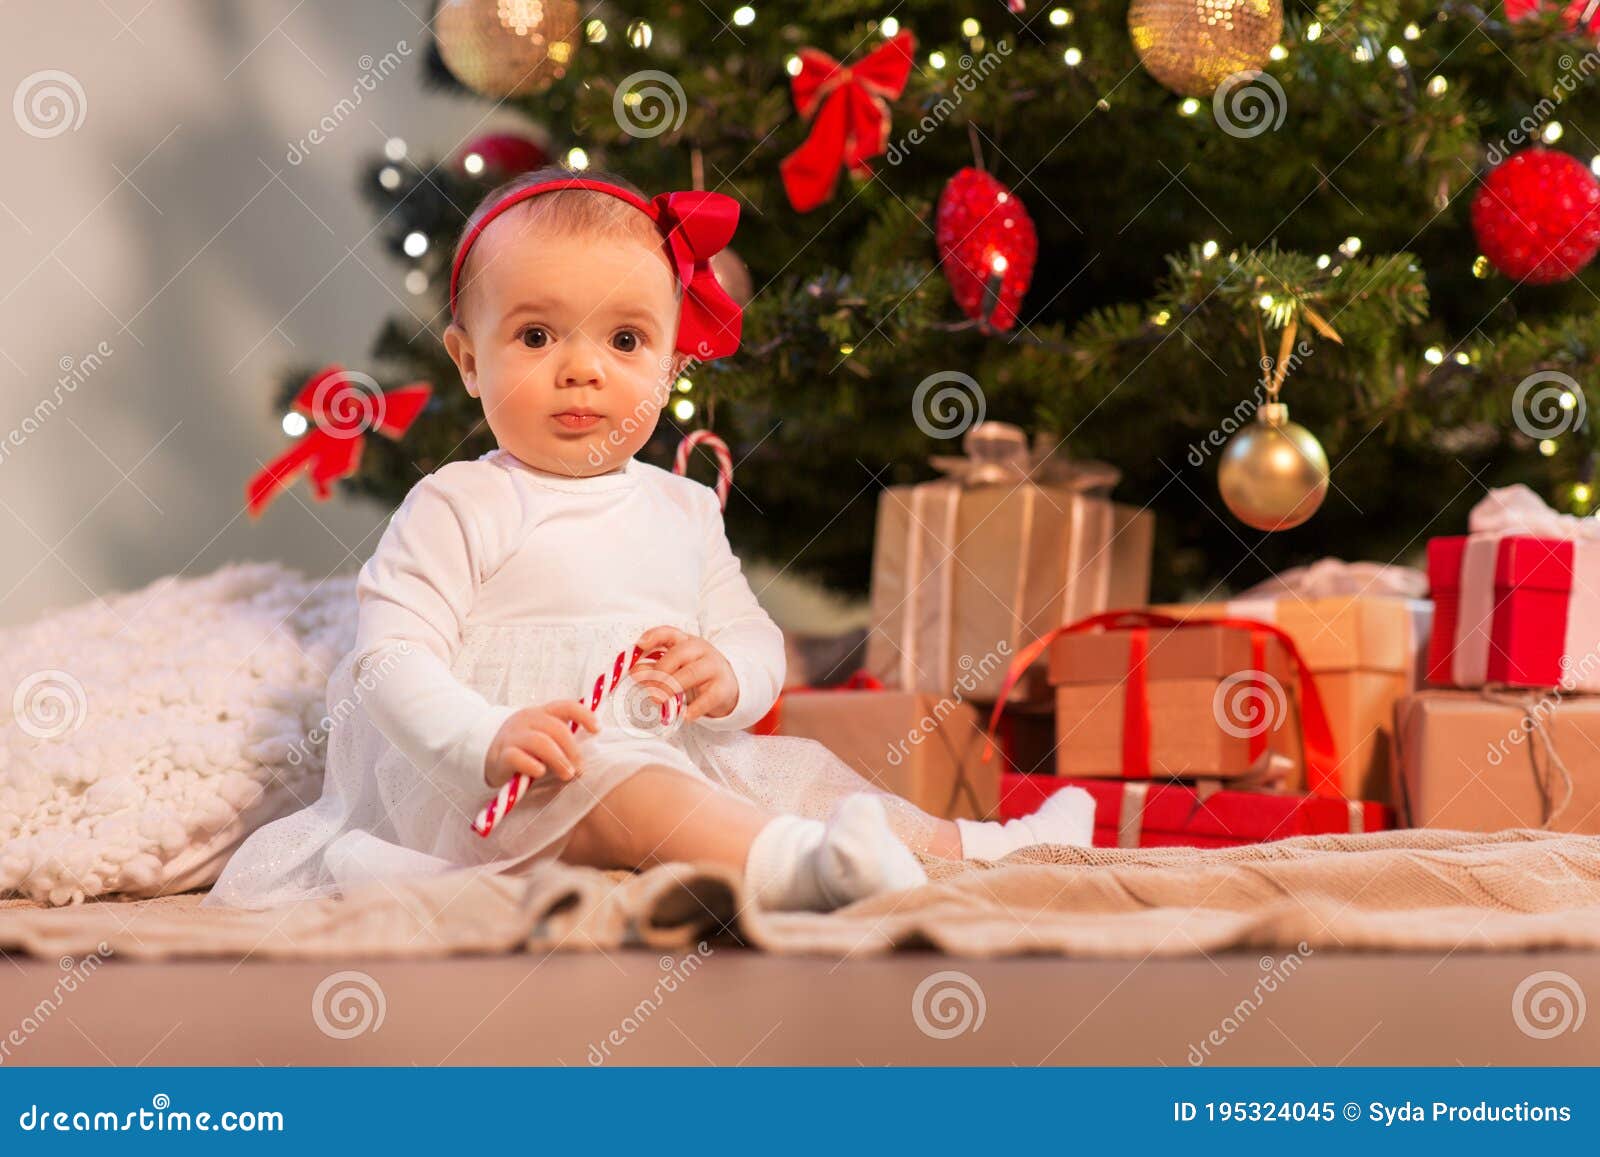 Baby Girl at Christmas Tree with Gifts at Home Stock Image - Image of ...